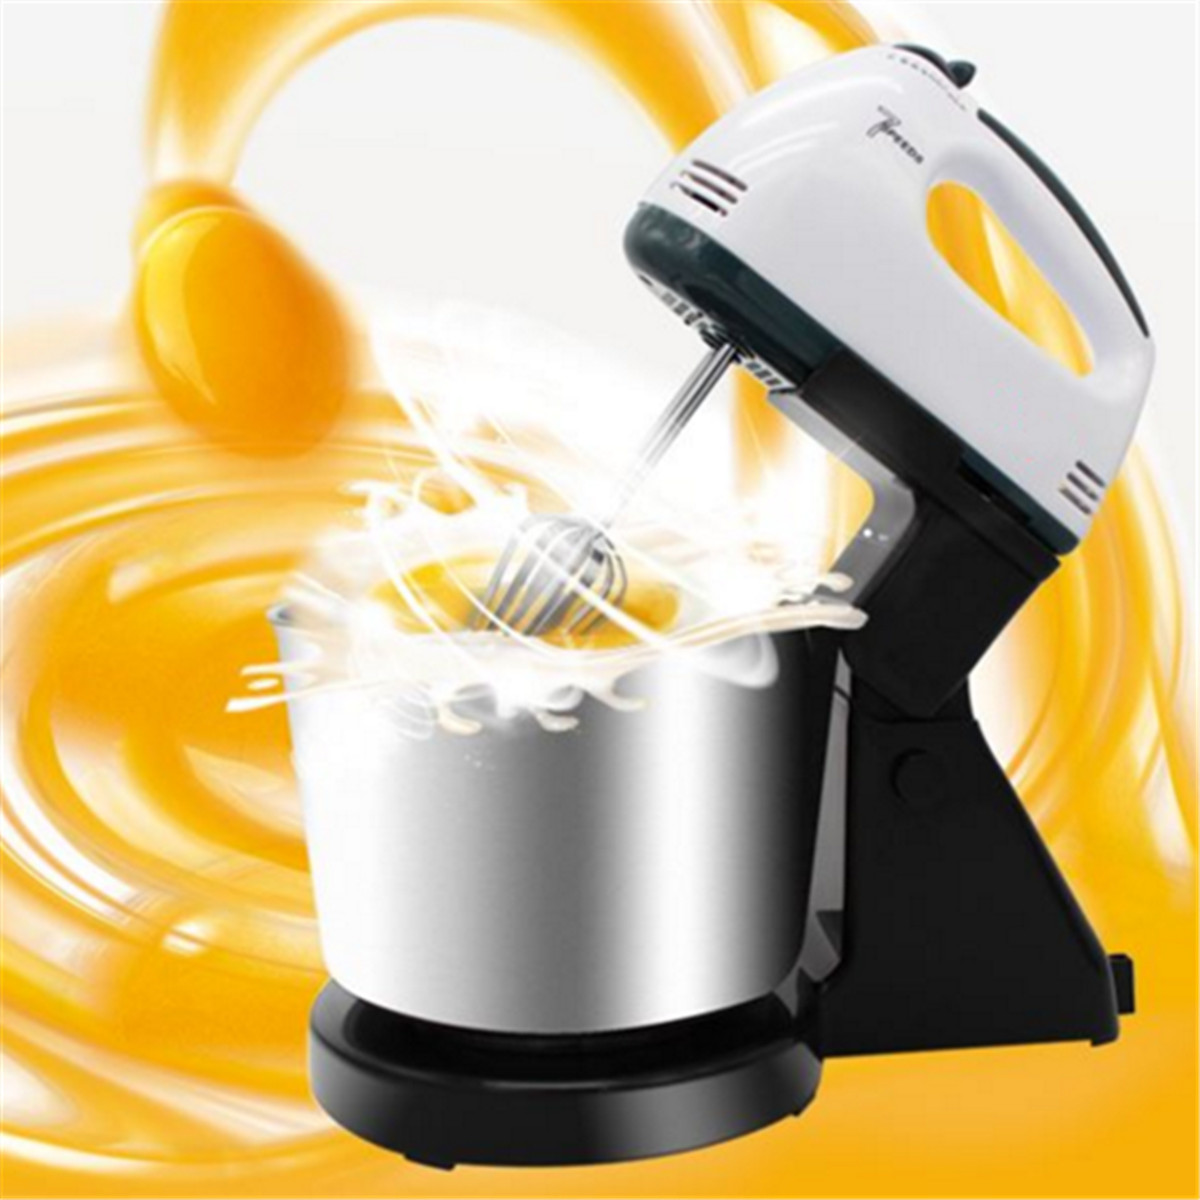 7 Speed Electric Egg Beater Dough Cakes Bread Egg Stand Mixer + Hand Blender + Bowl Food Mixer Kitchen Accessories Egg Tools 21